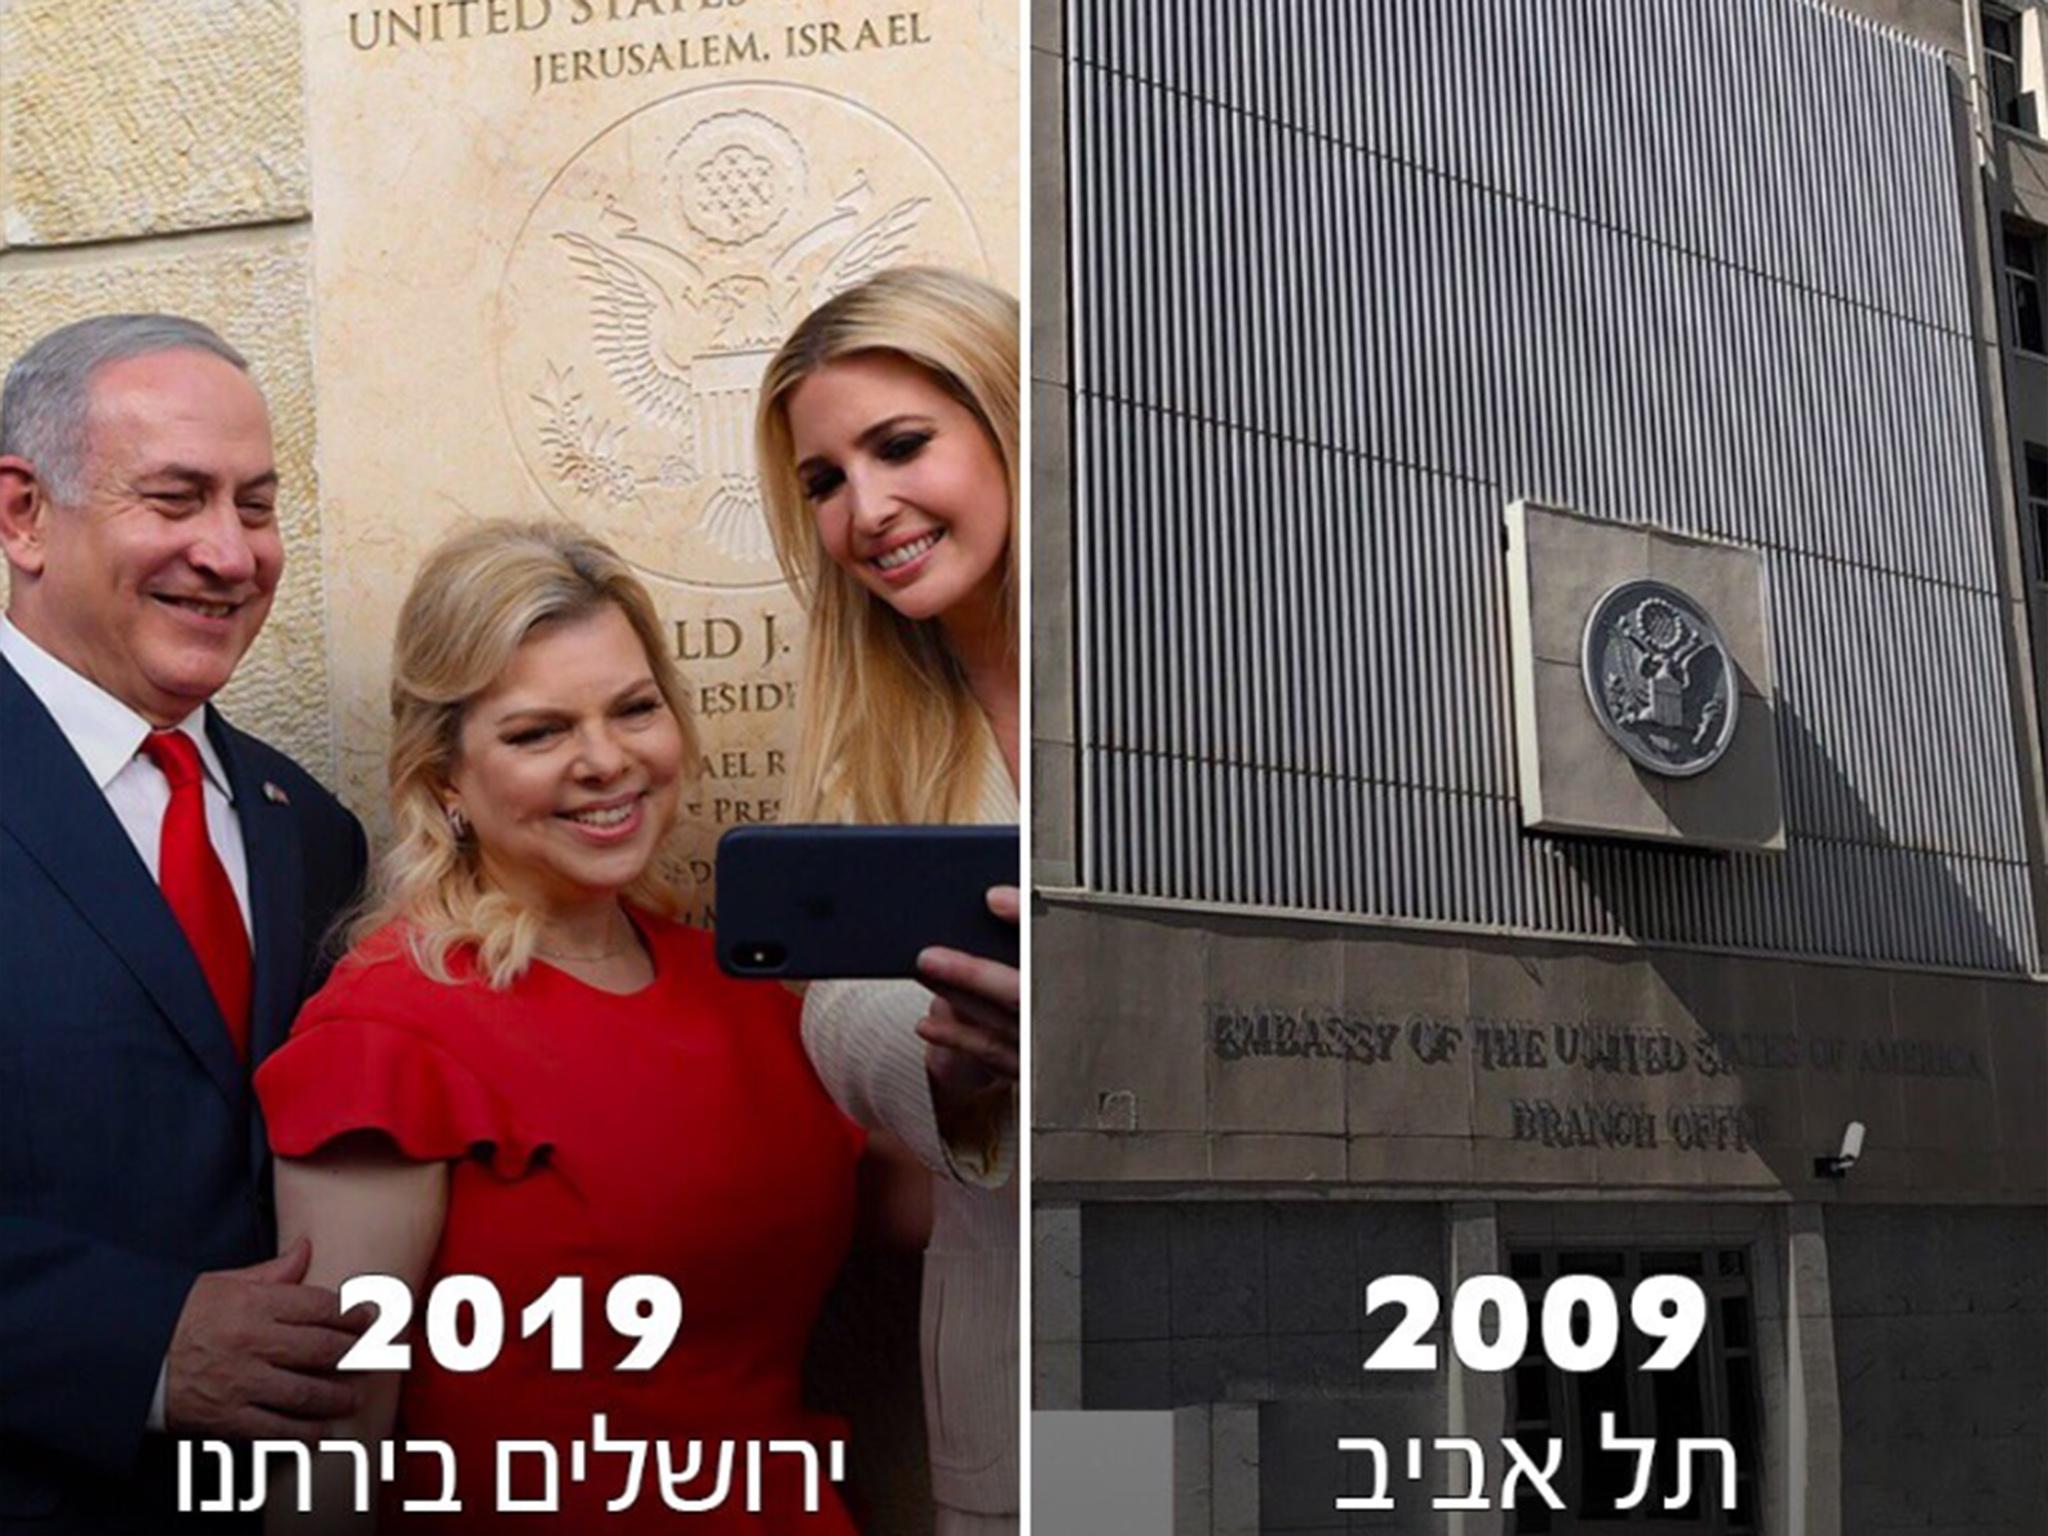 Netanyahu joined in the '10 year challenge' with two Twitter pictures which caused some controversy